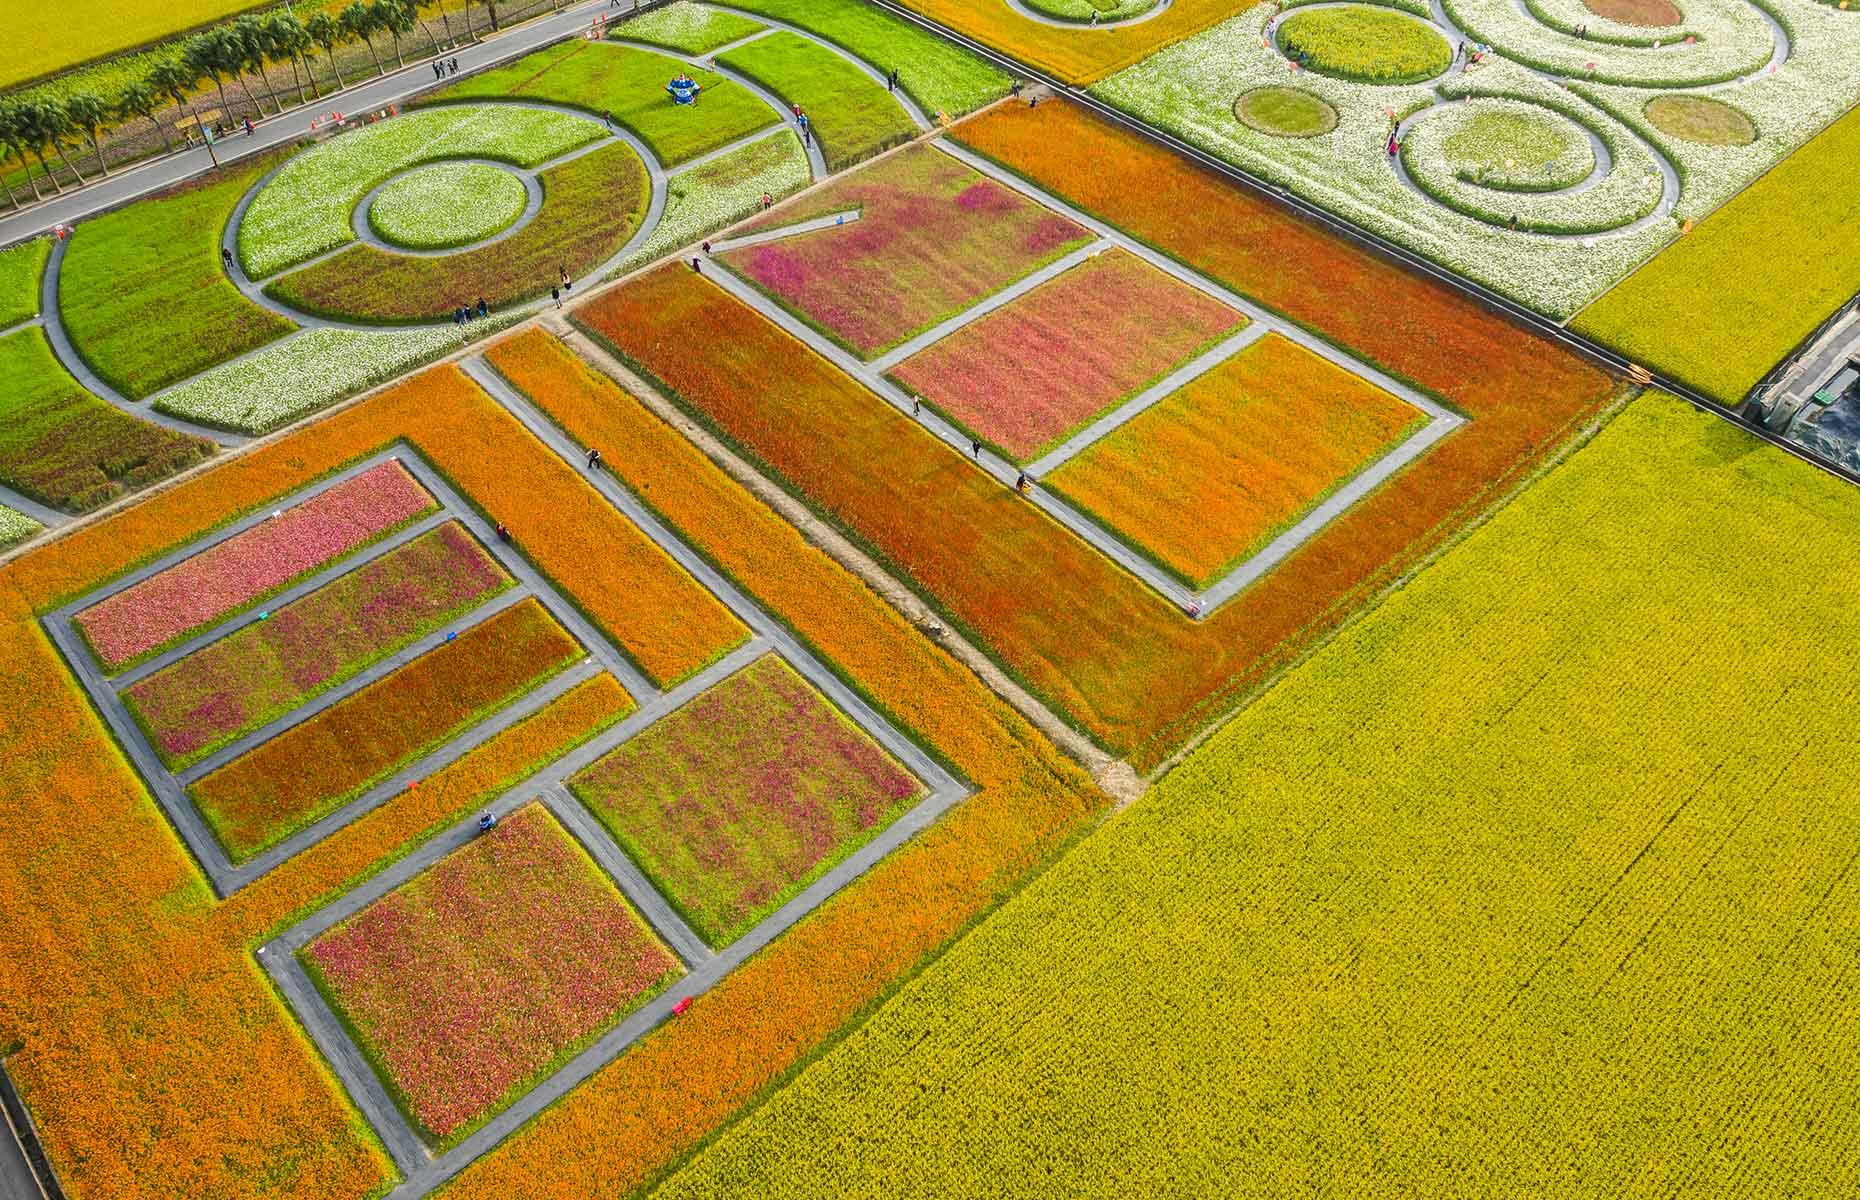 One of the most unforgettable sights in Taiwan is Taoyuan County’s Daxi Flower Ocean Farm Ranch. Spanning some 15 acres, this flower farm is a popular filming spot for Chinese television shows and there are European nods with the likes of a southern European-style restaurant called Van Gogh House. Its five-acre Purple Dream Zone is a daydream of lavender and sage while the Rainbow Flower Field is a kaleidoscope of colors with flowers blossoming through the seasons.